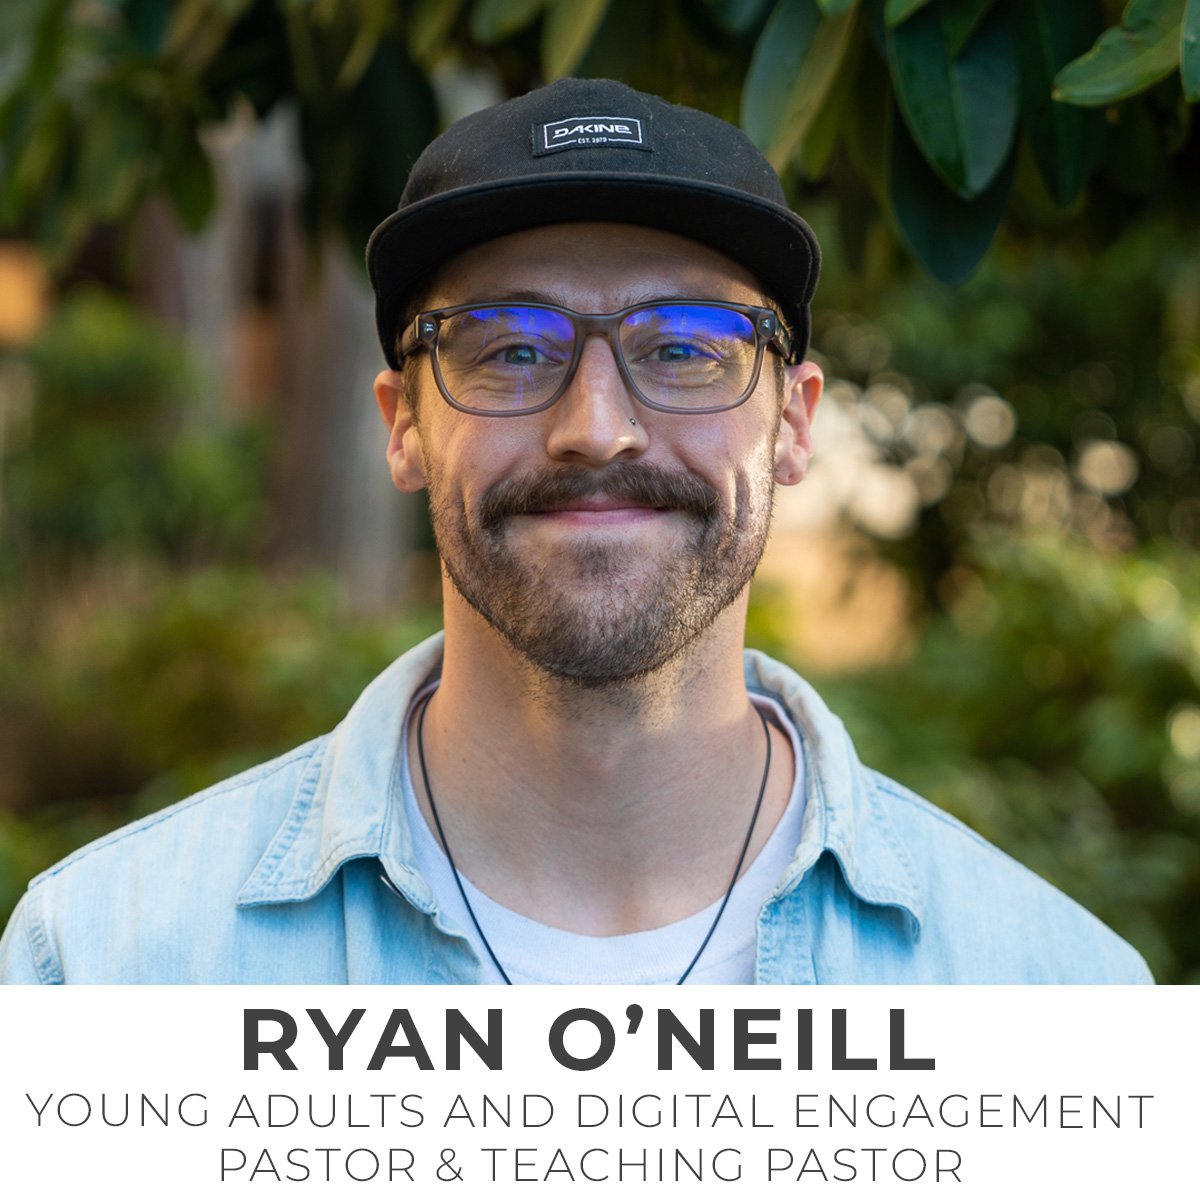 Ryan O'Neill, Young Adults and Digital Engagement Pastor